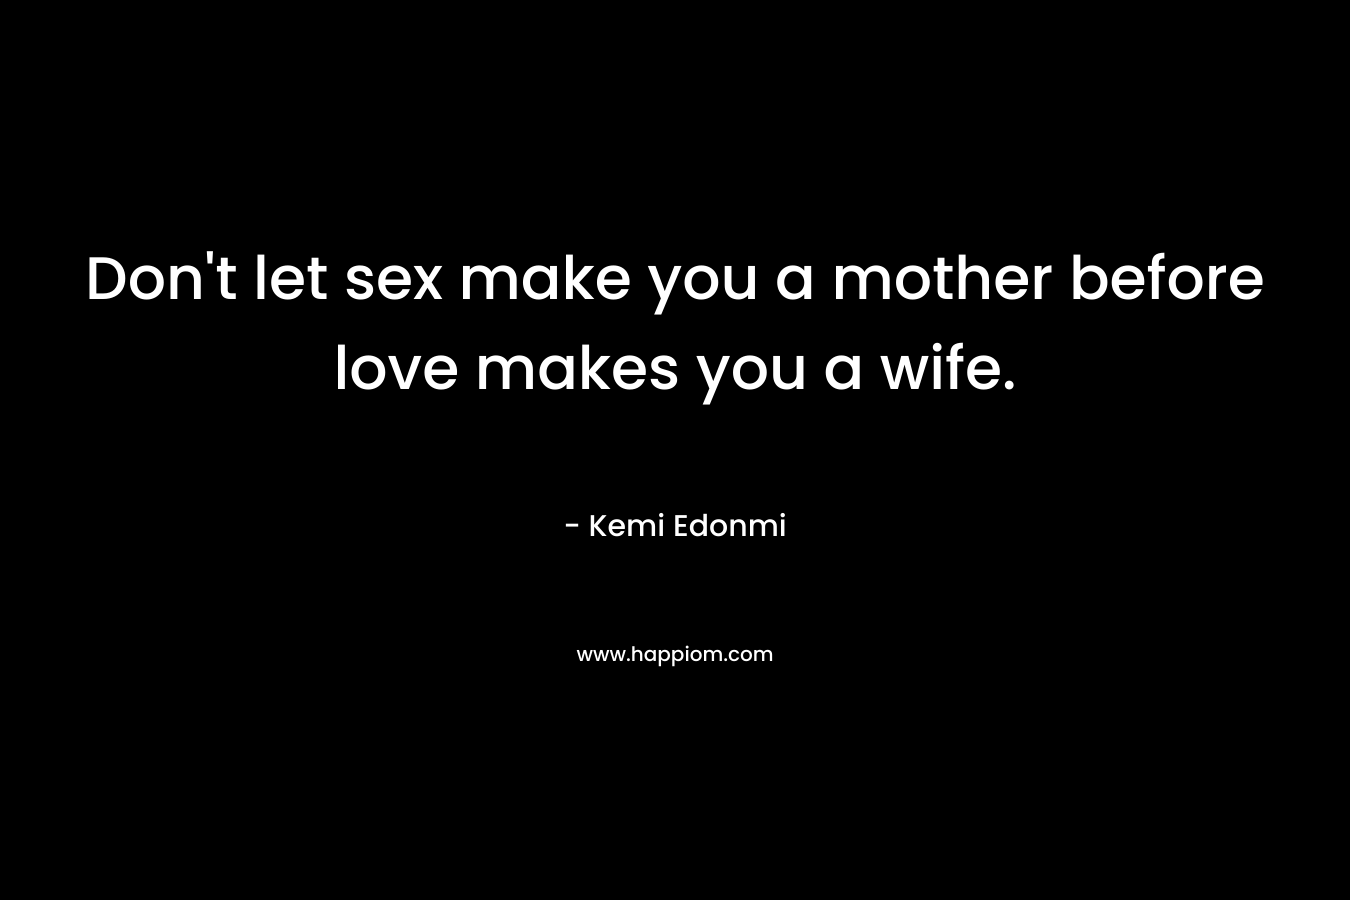 Don’t let sex make you a mother before love makes you a wife. – Kemi Edonmi